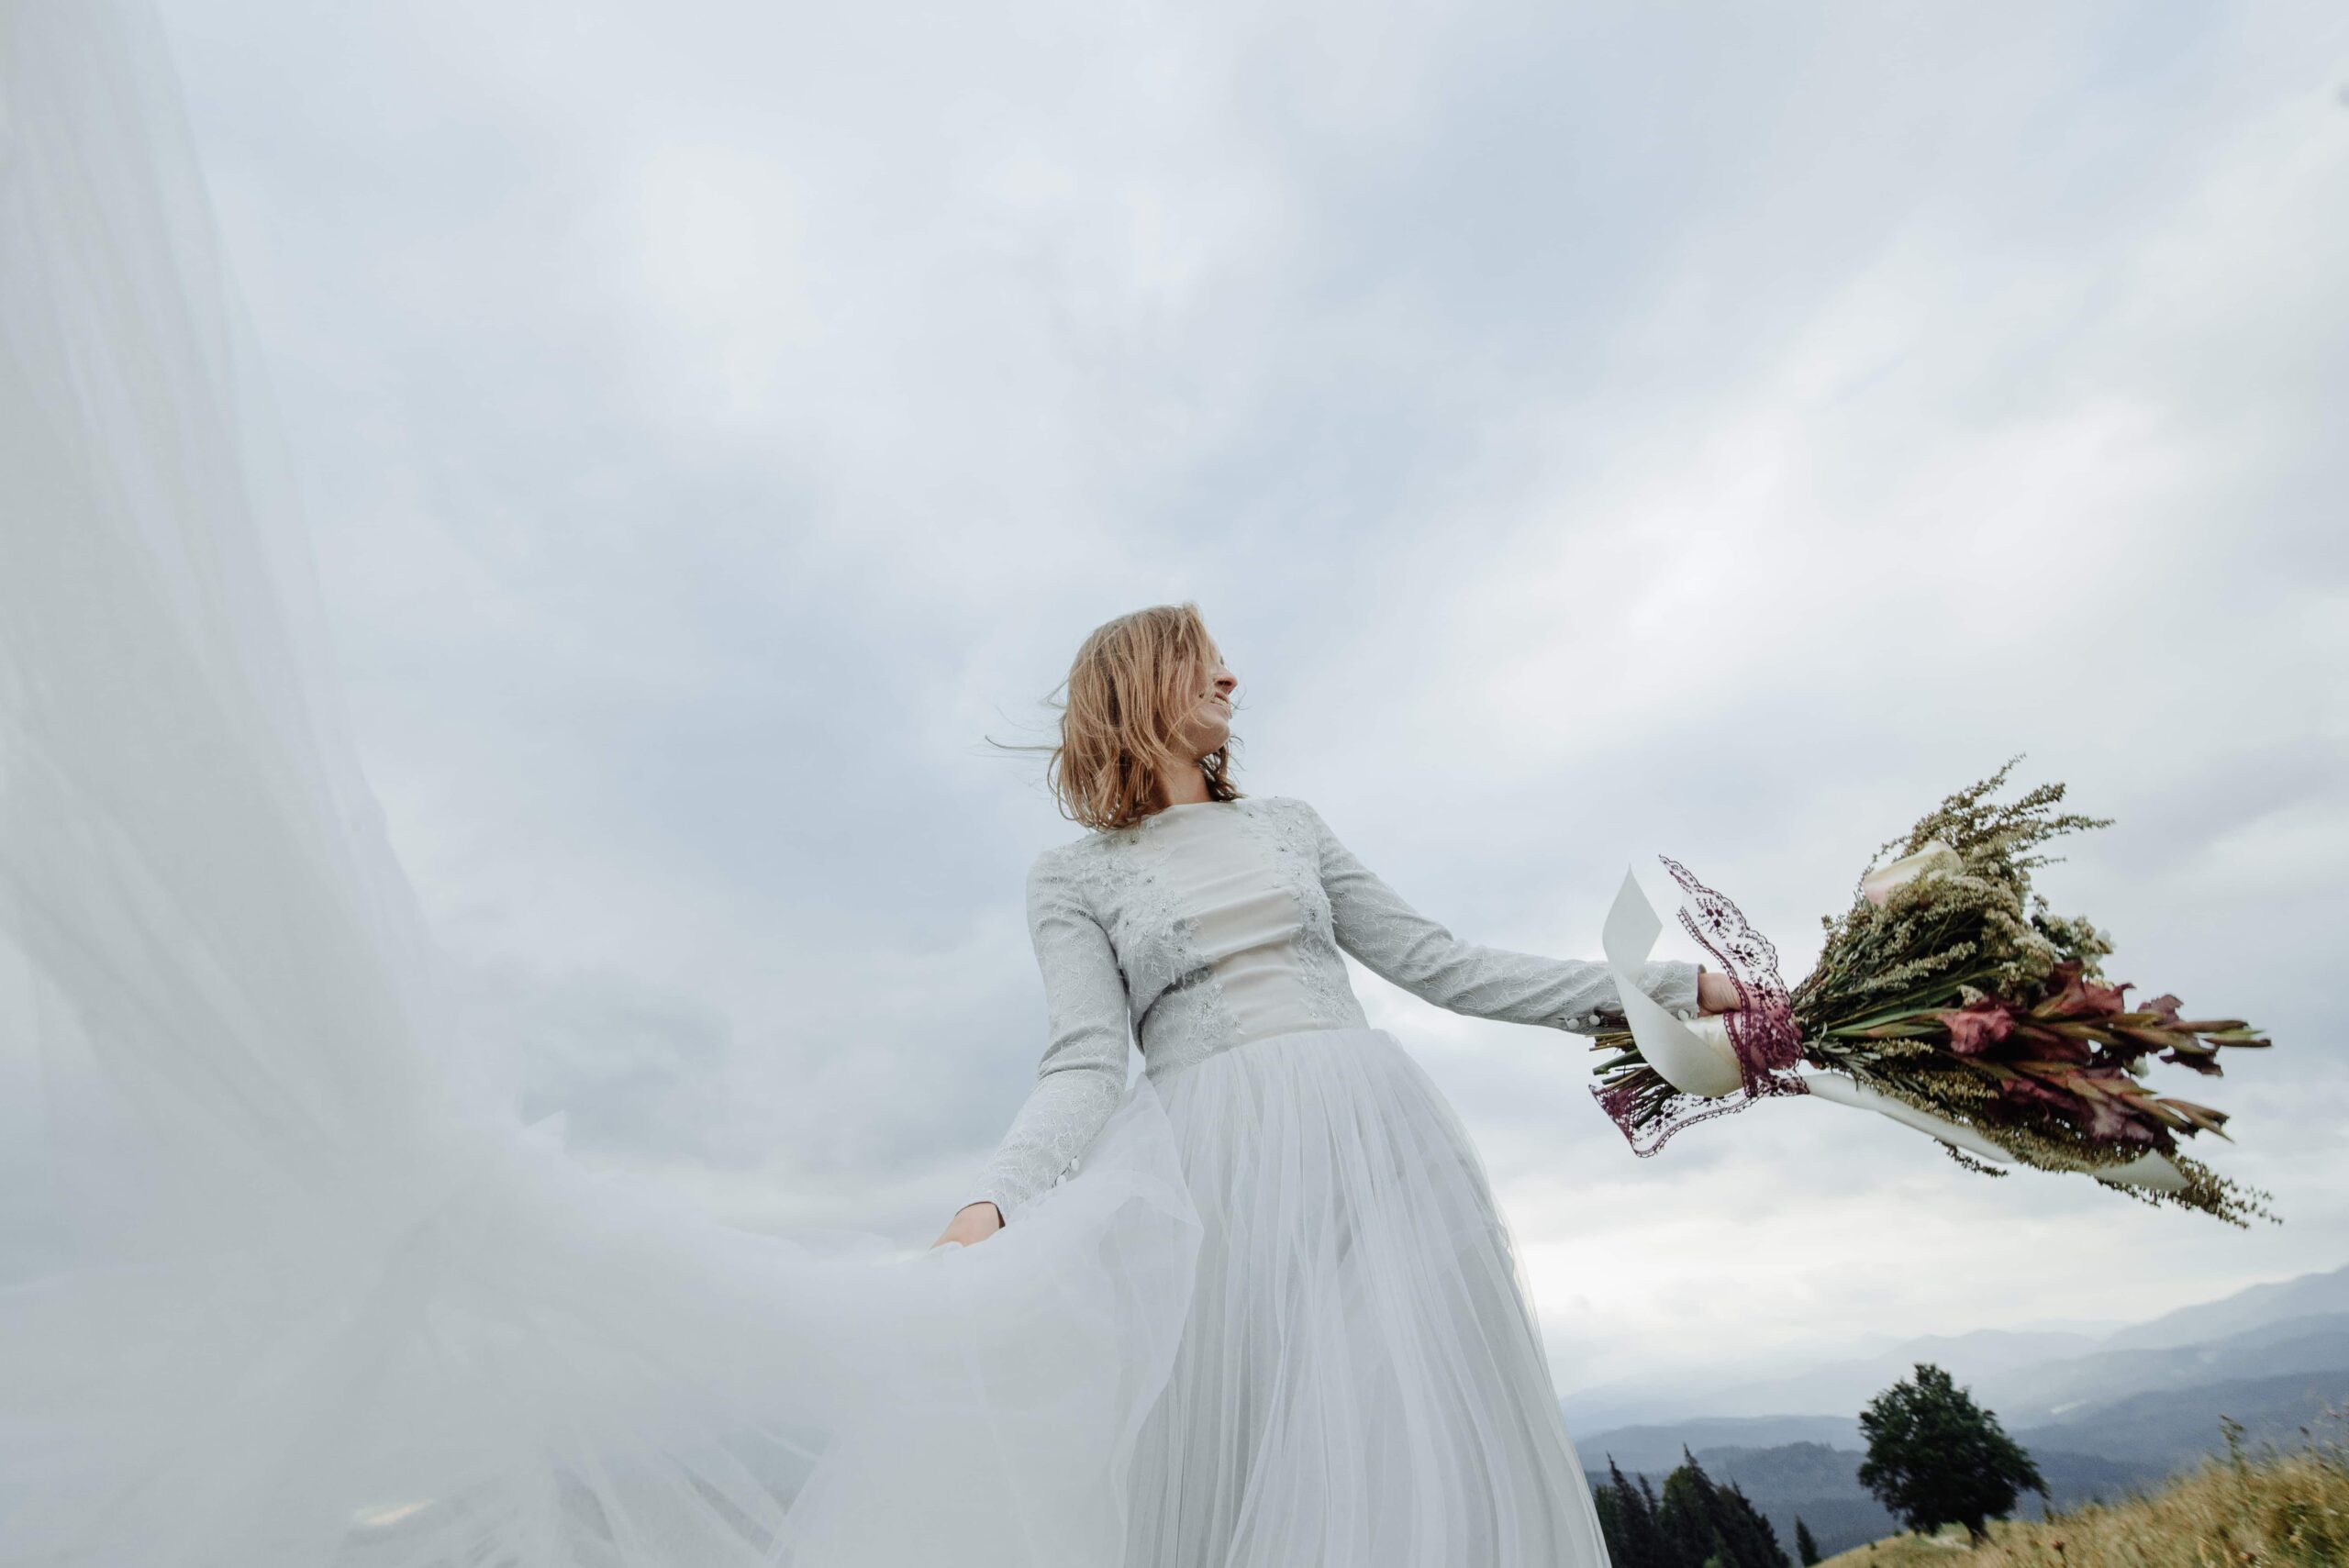 A bride in her wedding gown happily enjoys the moment, holding a flower bouquet.